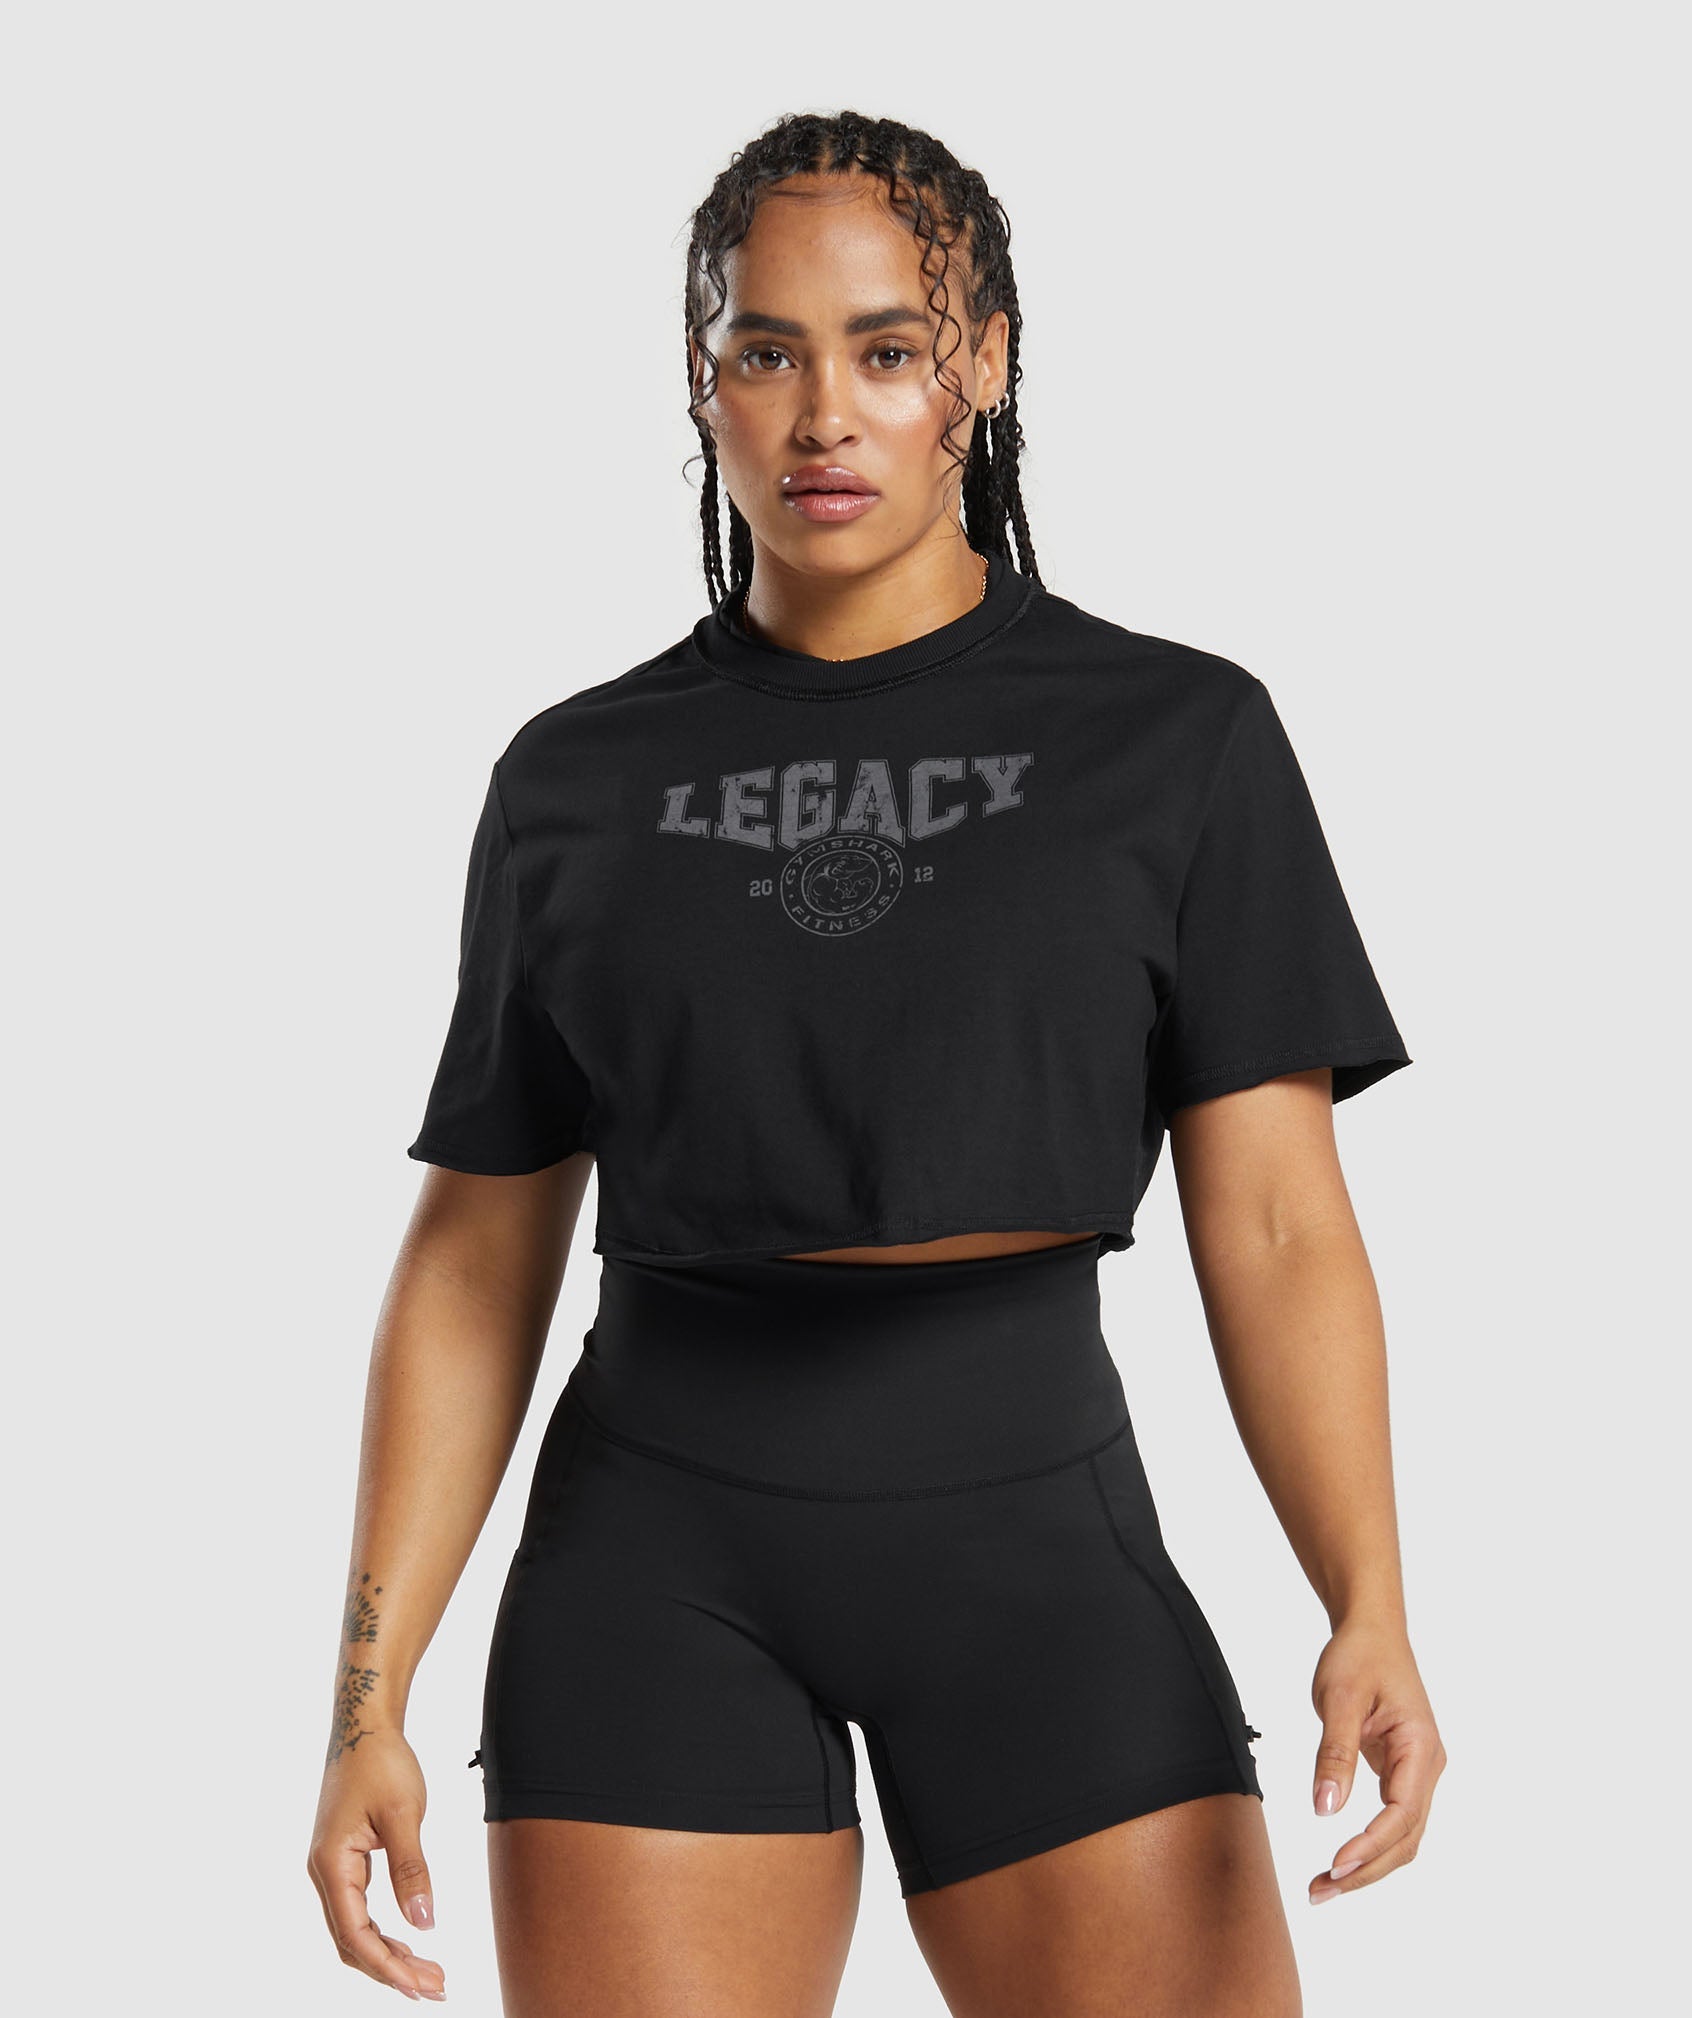 Legacy Graphic Crop Top in Black - view 1